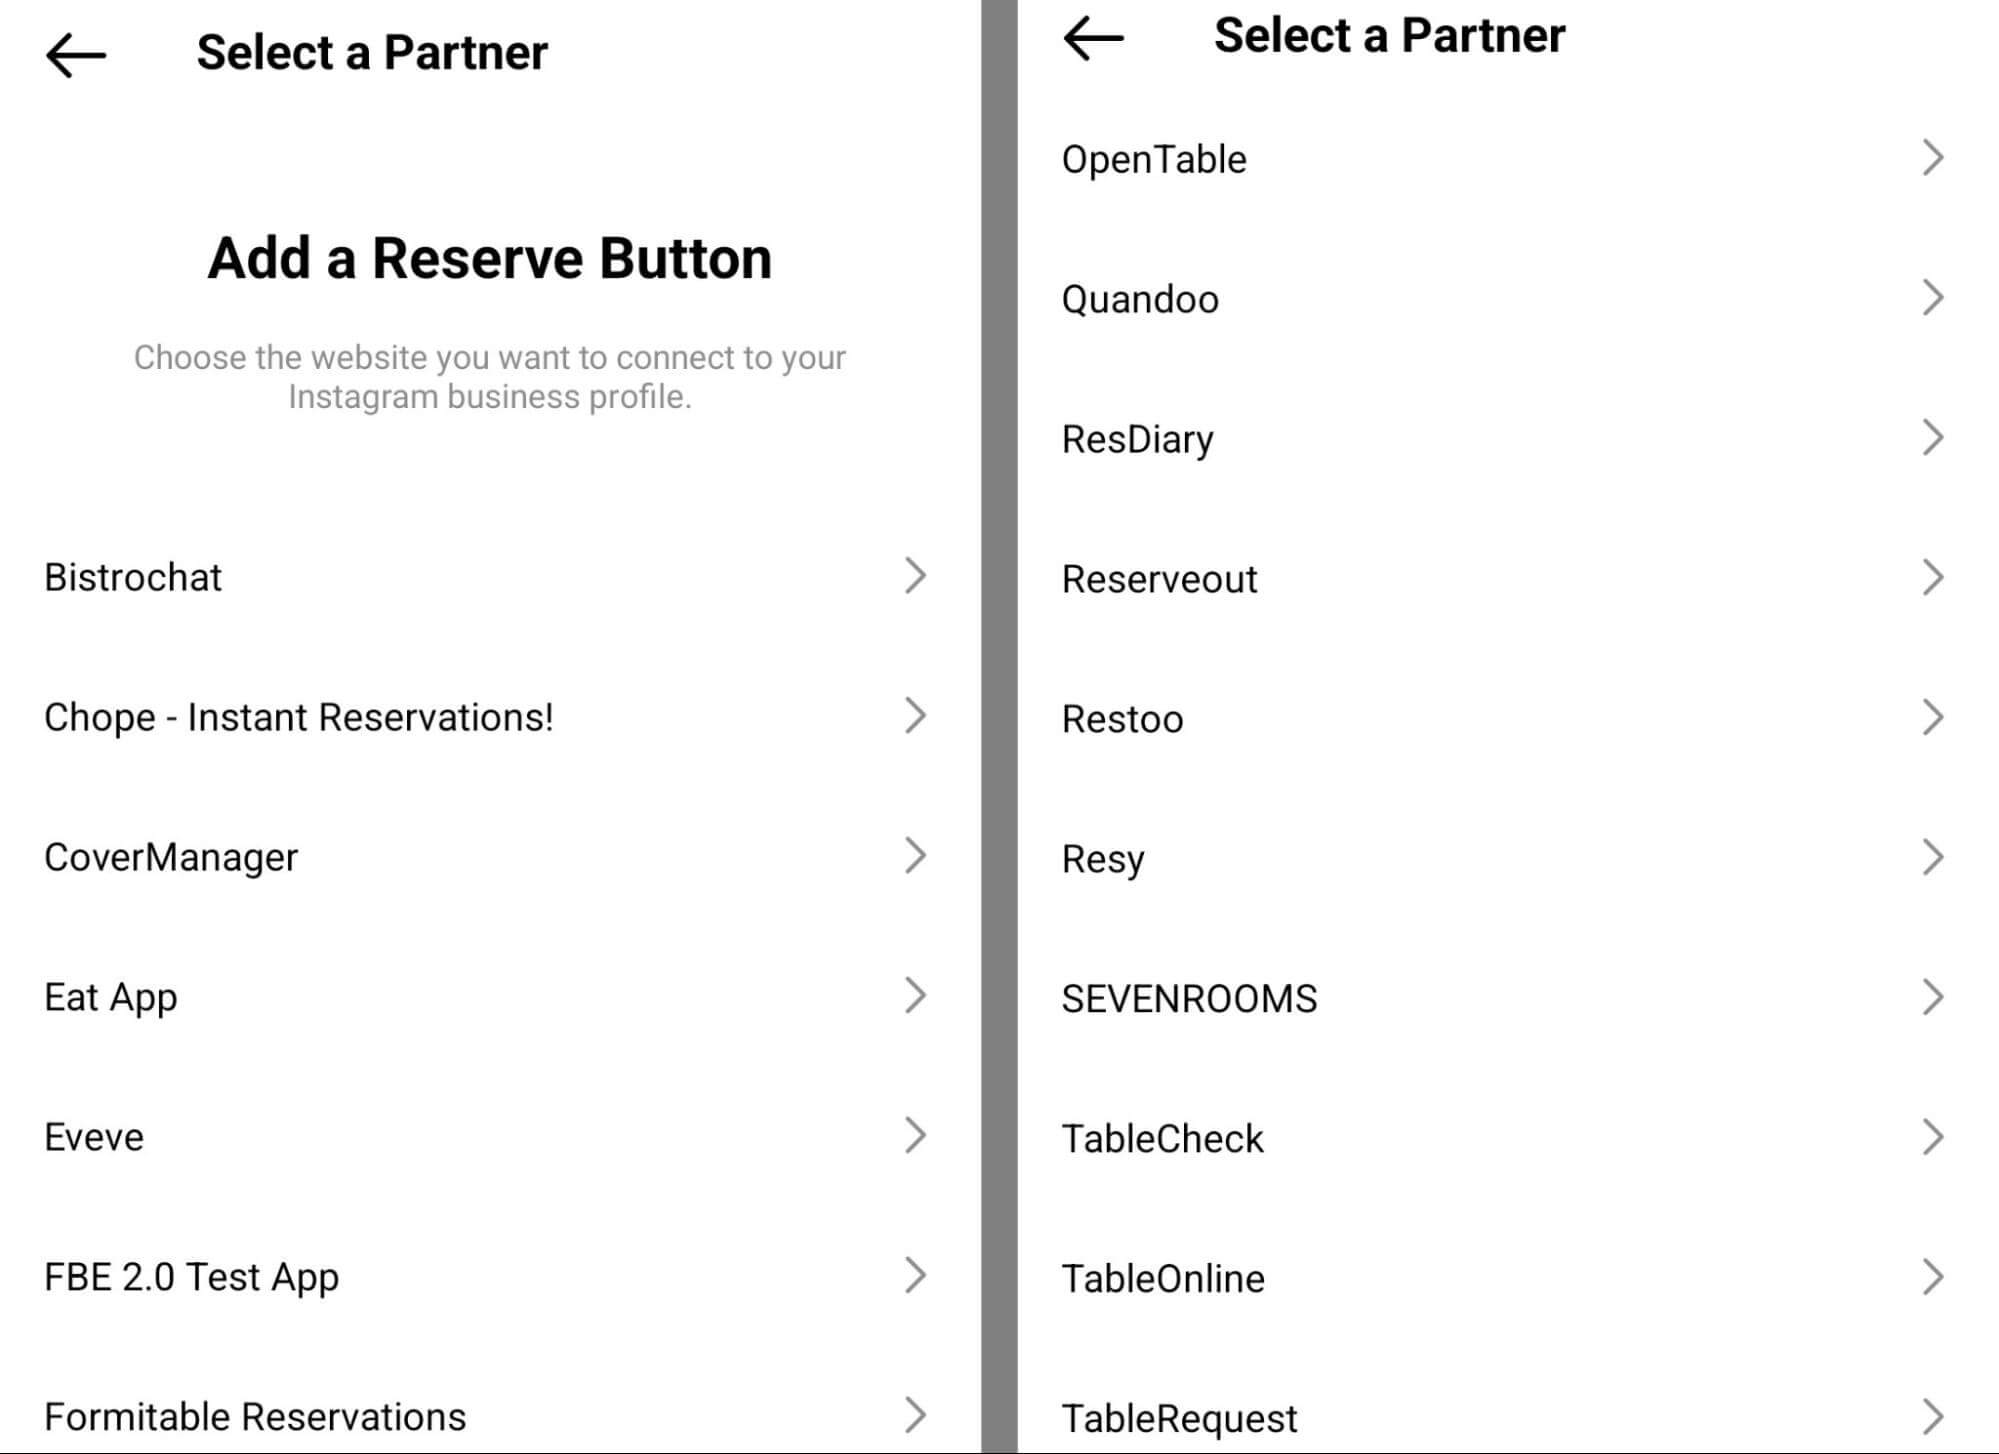 how-to-create-a-reserve-action-buttton-on-instagram-restaurant-platforms-connect-to-professional-profile-resy-opentable-select-a-partner-example-7